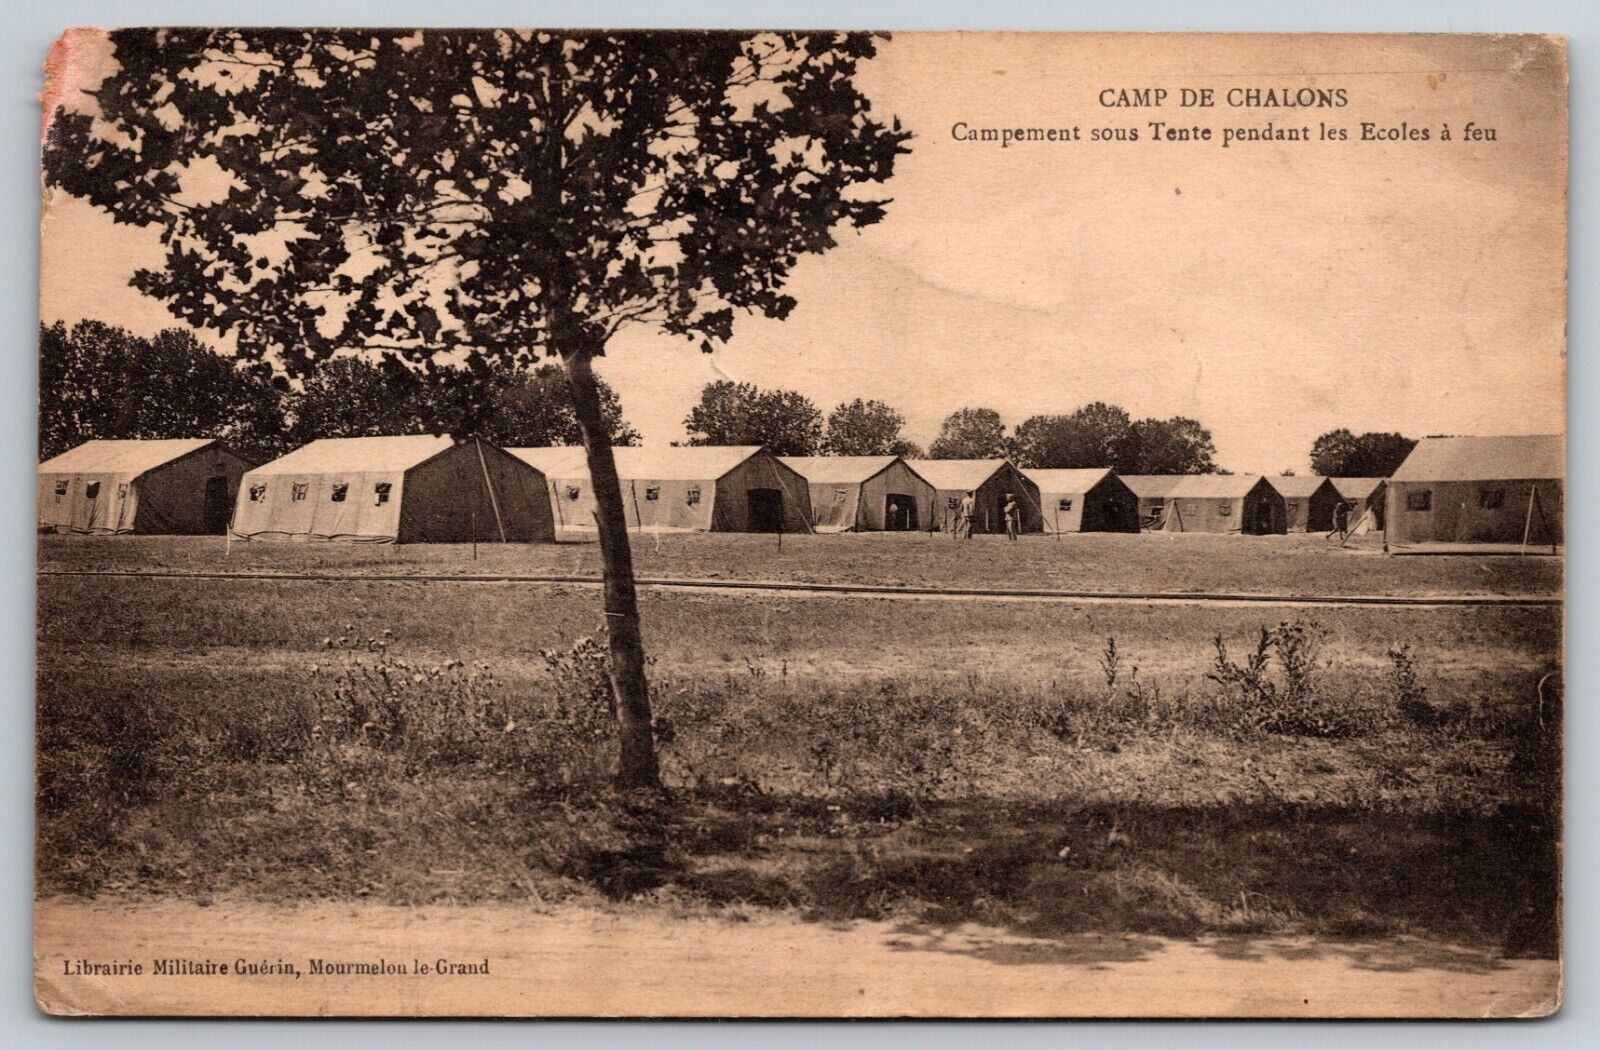 Chalons Camp Tent Camps Fire Schools France Postcard POSTED